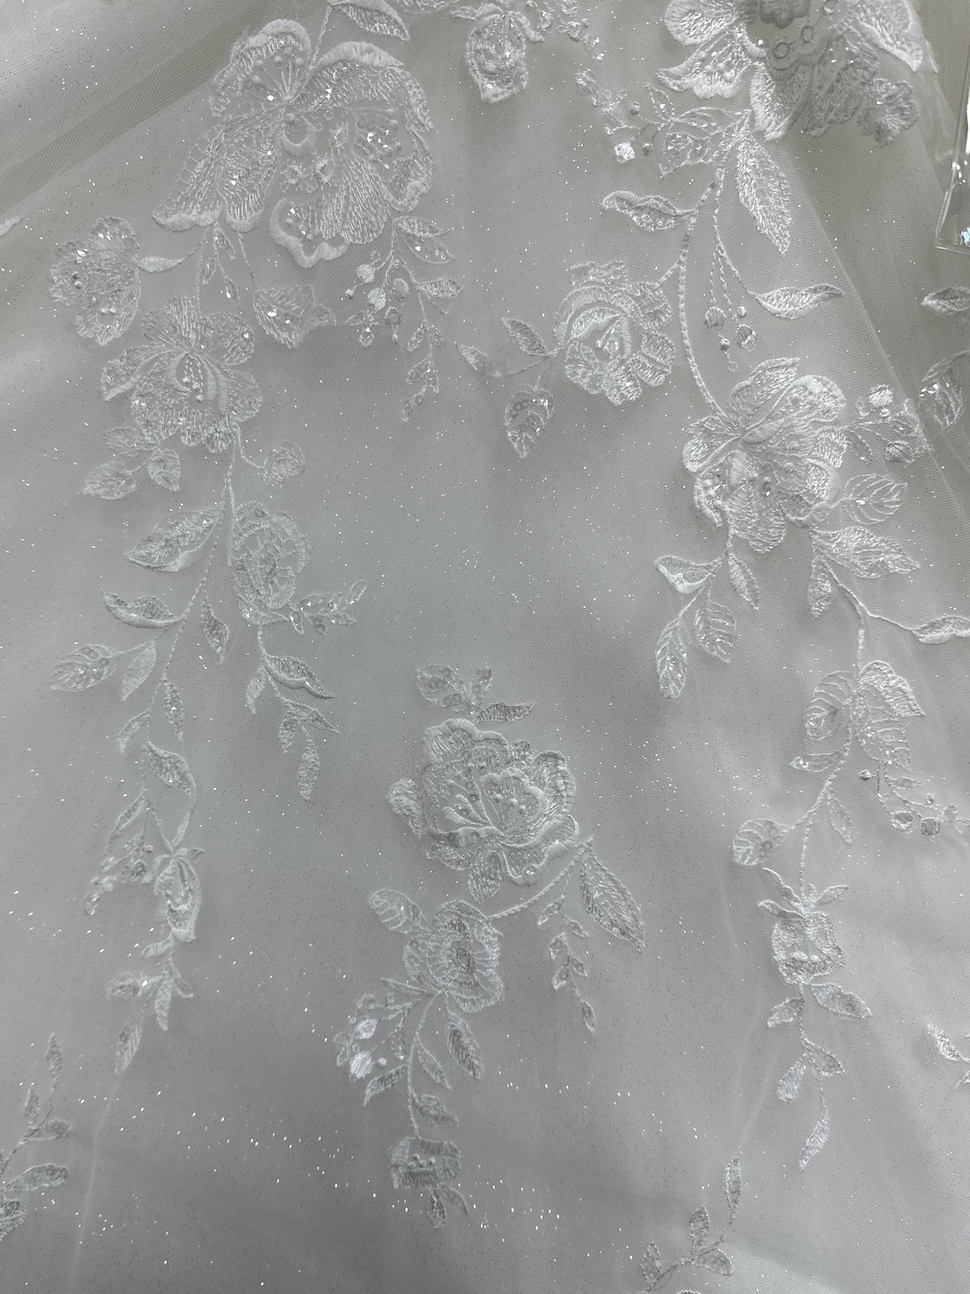 Lace applique of roses and vines matches a lovely rose vine perfect for a destination wedding